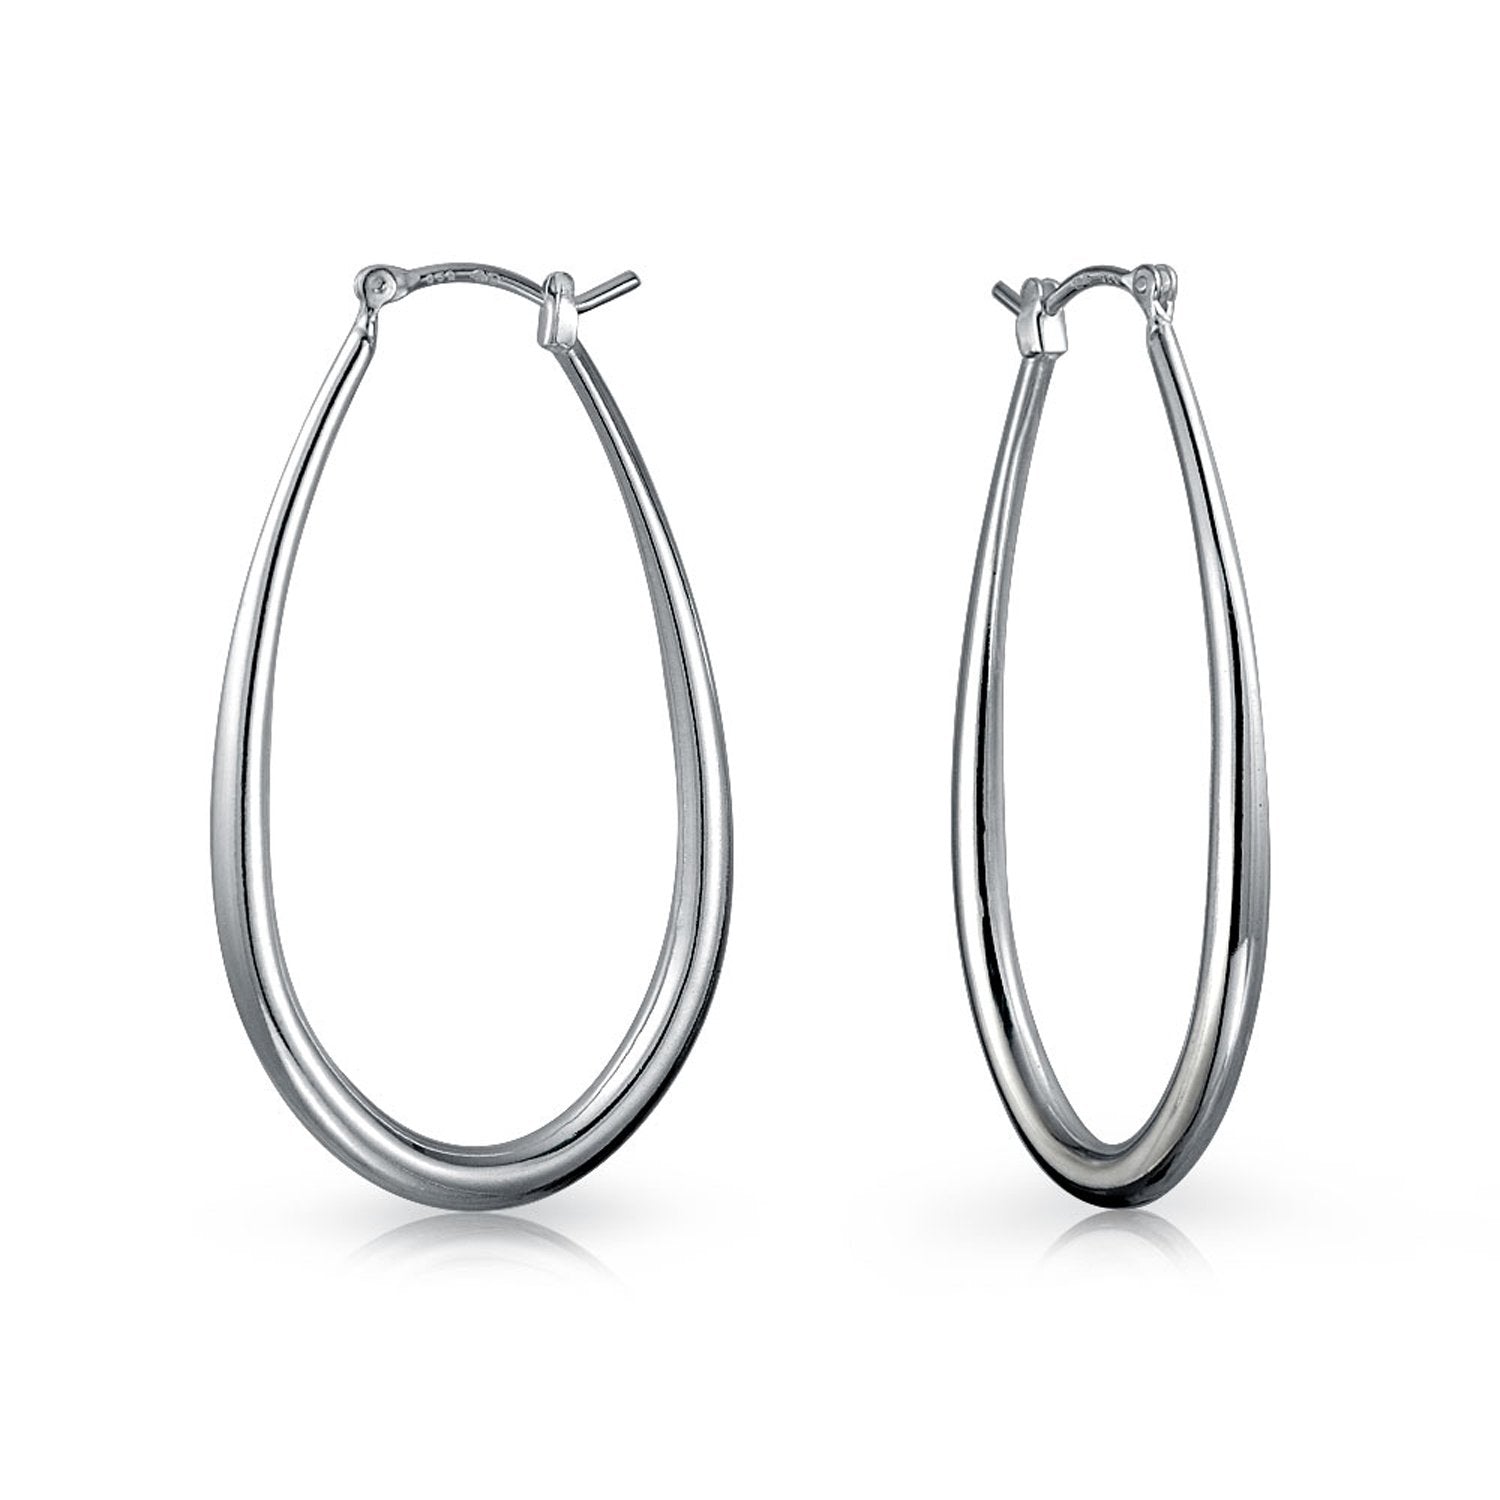 Oval Hoop Earrings 925 Sterling Silver Hinged Notched Post 2 Inch - Joyeria Lady